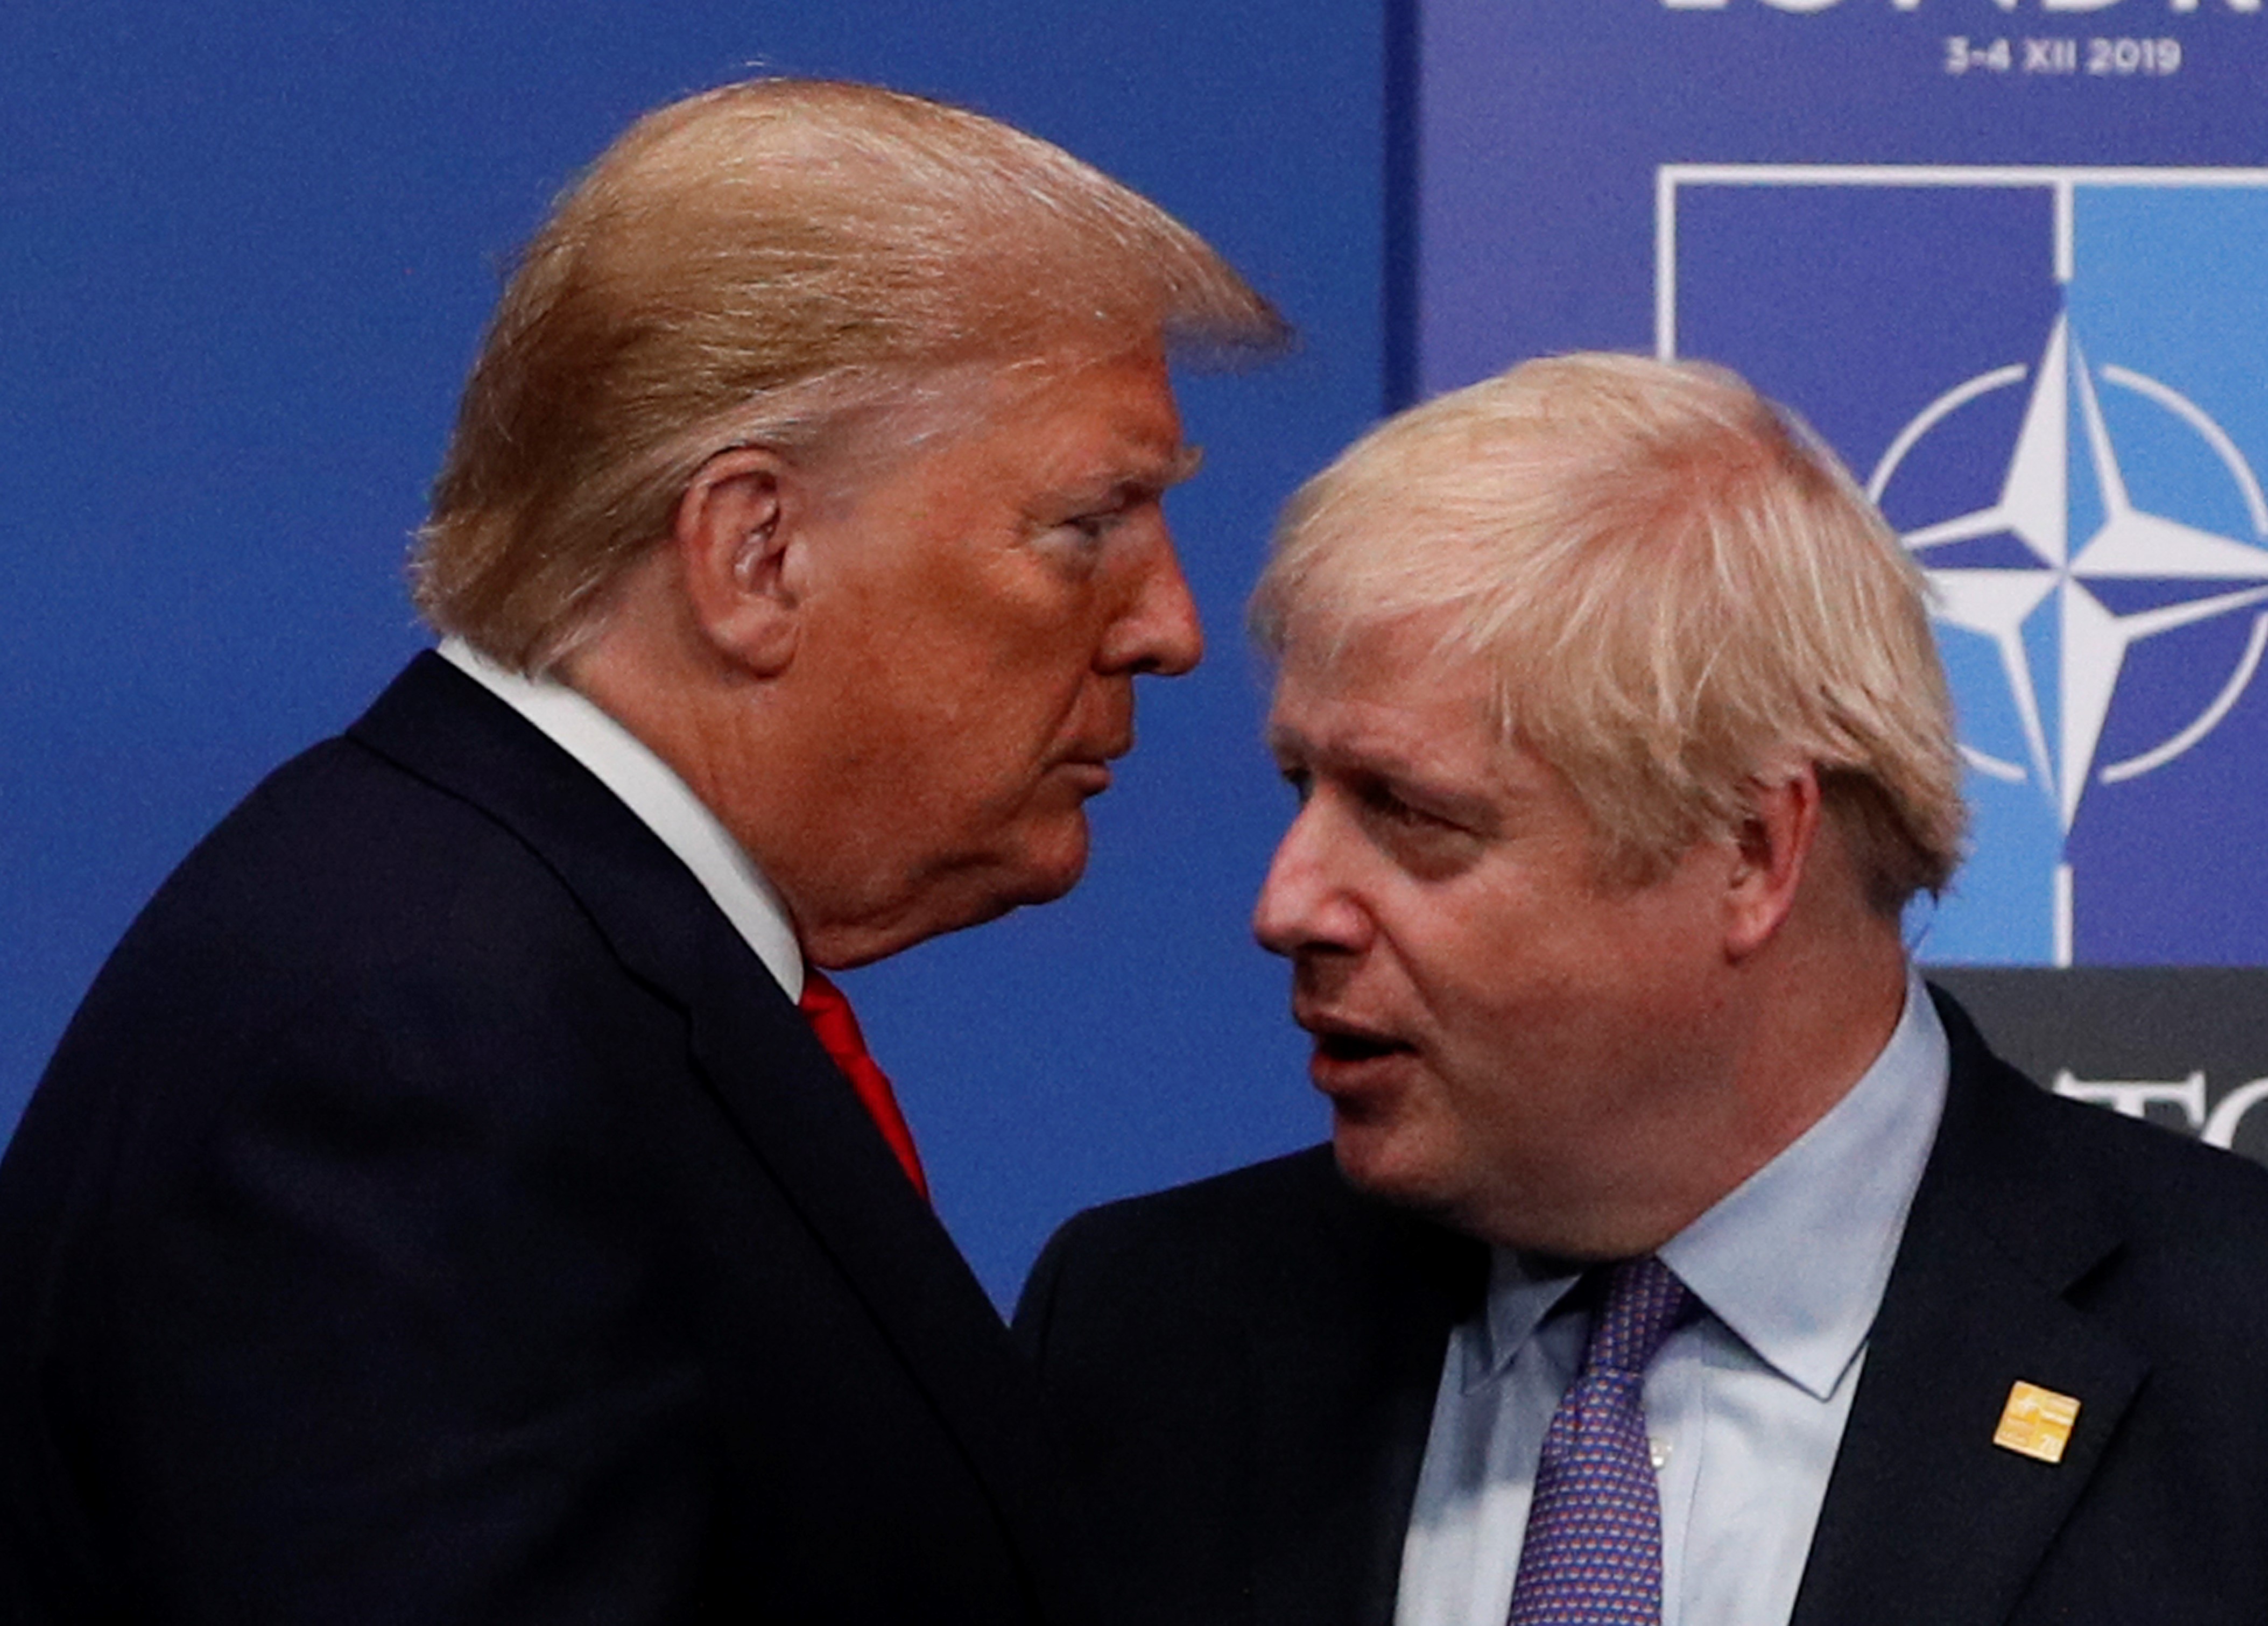 Britain's Prime Minister Boris Johnson (R) greets US President Donald Trump upon arrival for the NATO summit at the Grove hotel in Watford, northeast of London on December 4, 2019.